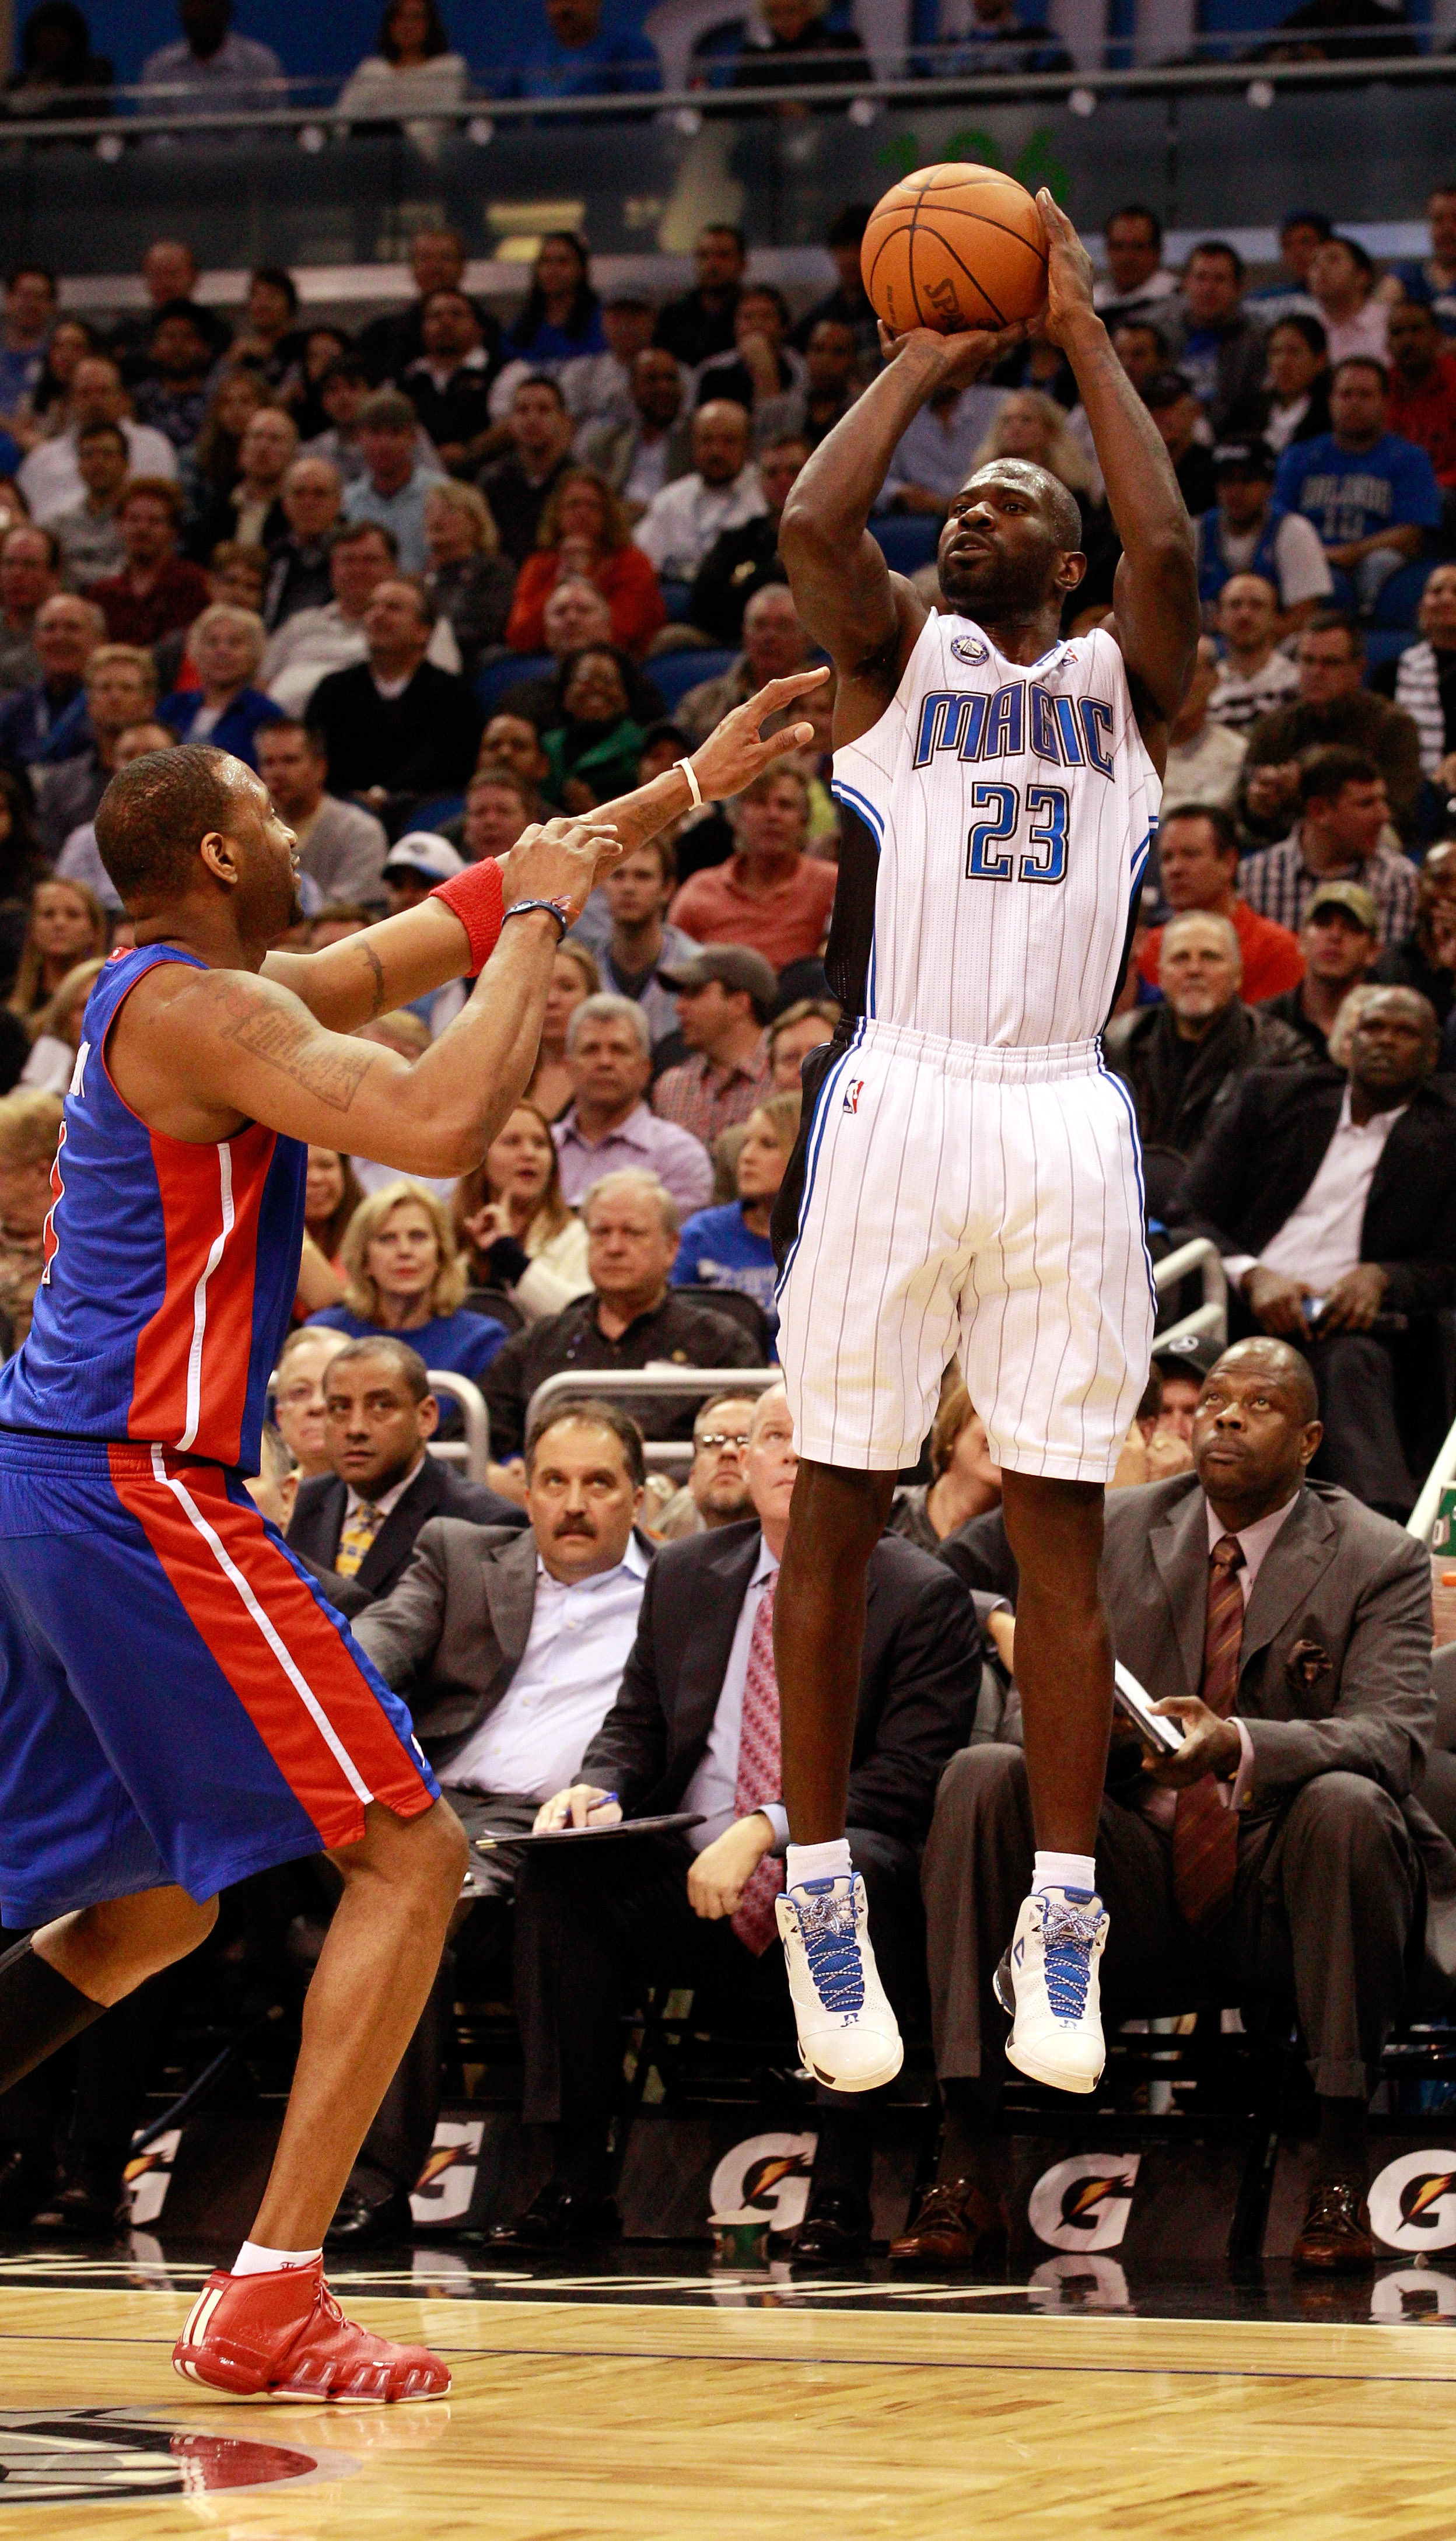 ORLANDO, FL - JANUARY 24:  Jason Richardson #23 of the Orlando Magic attempts a shot over Tracy McGrady #1 of the Detroit Pistons during the game at Amway Arena on January 24, 2011 in Orlando, Florida.  NOTE TO USER: User expressly acknowledges and agrees